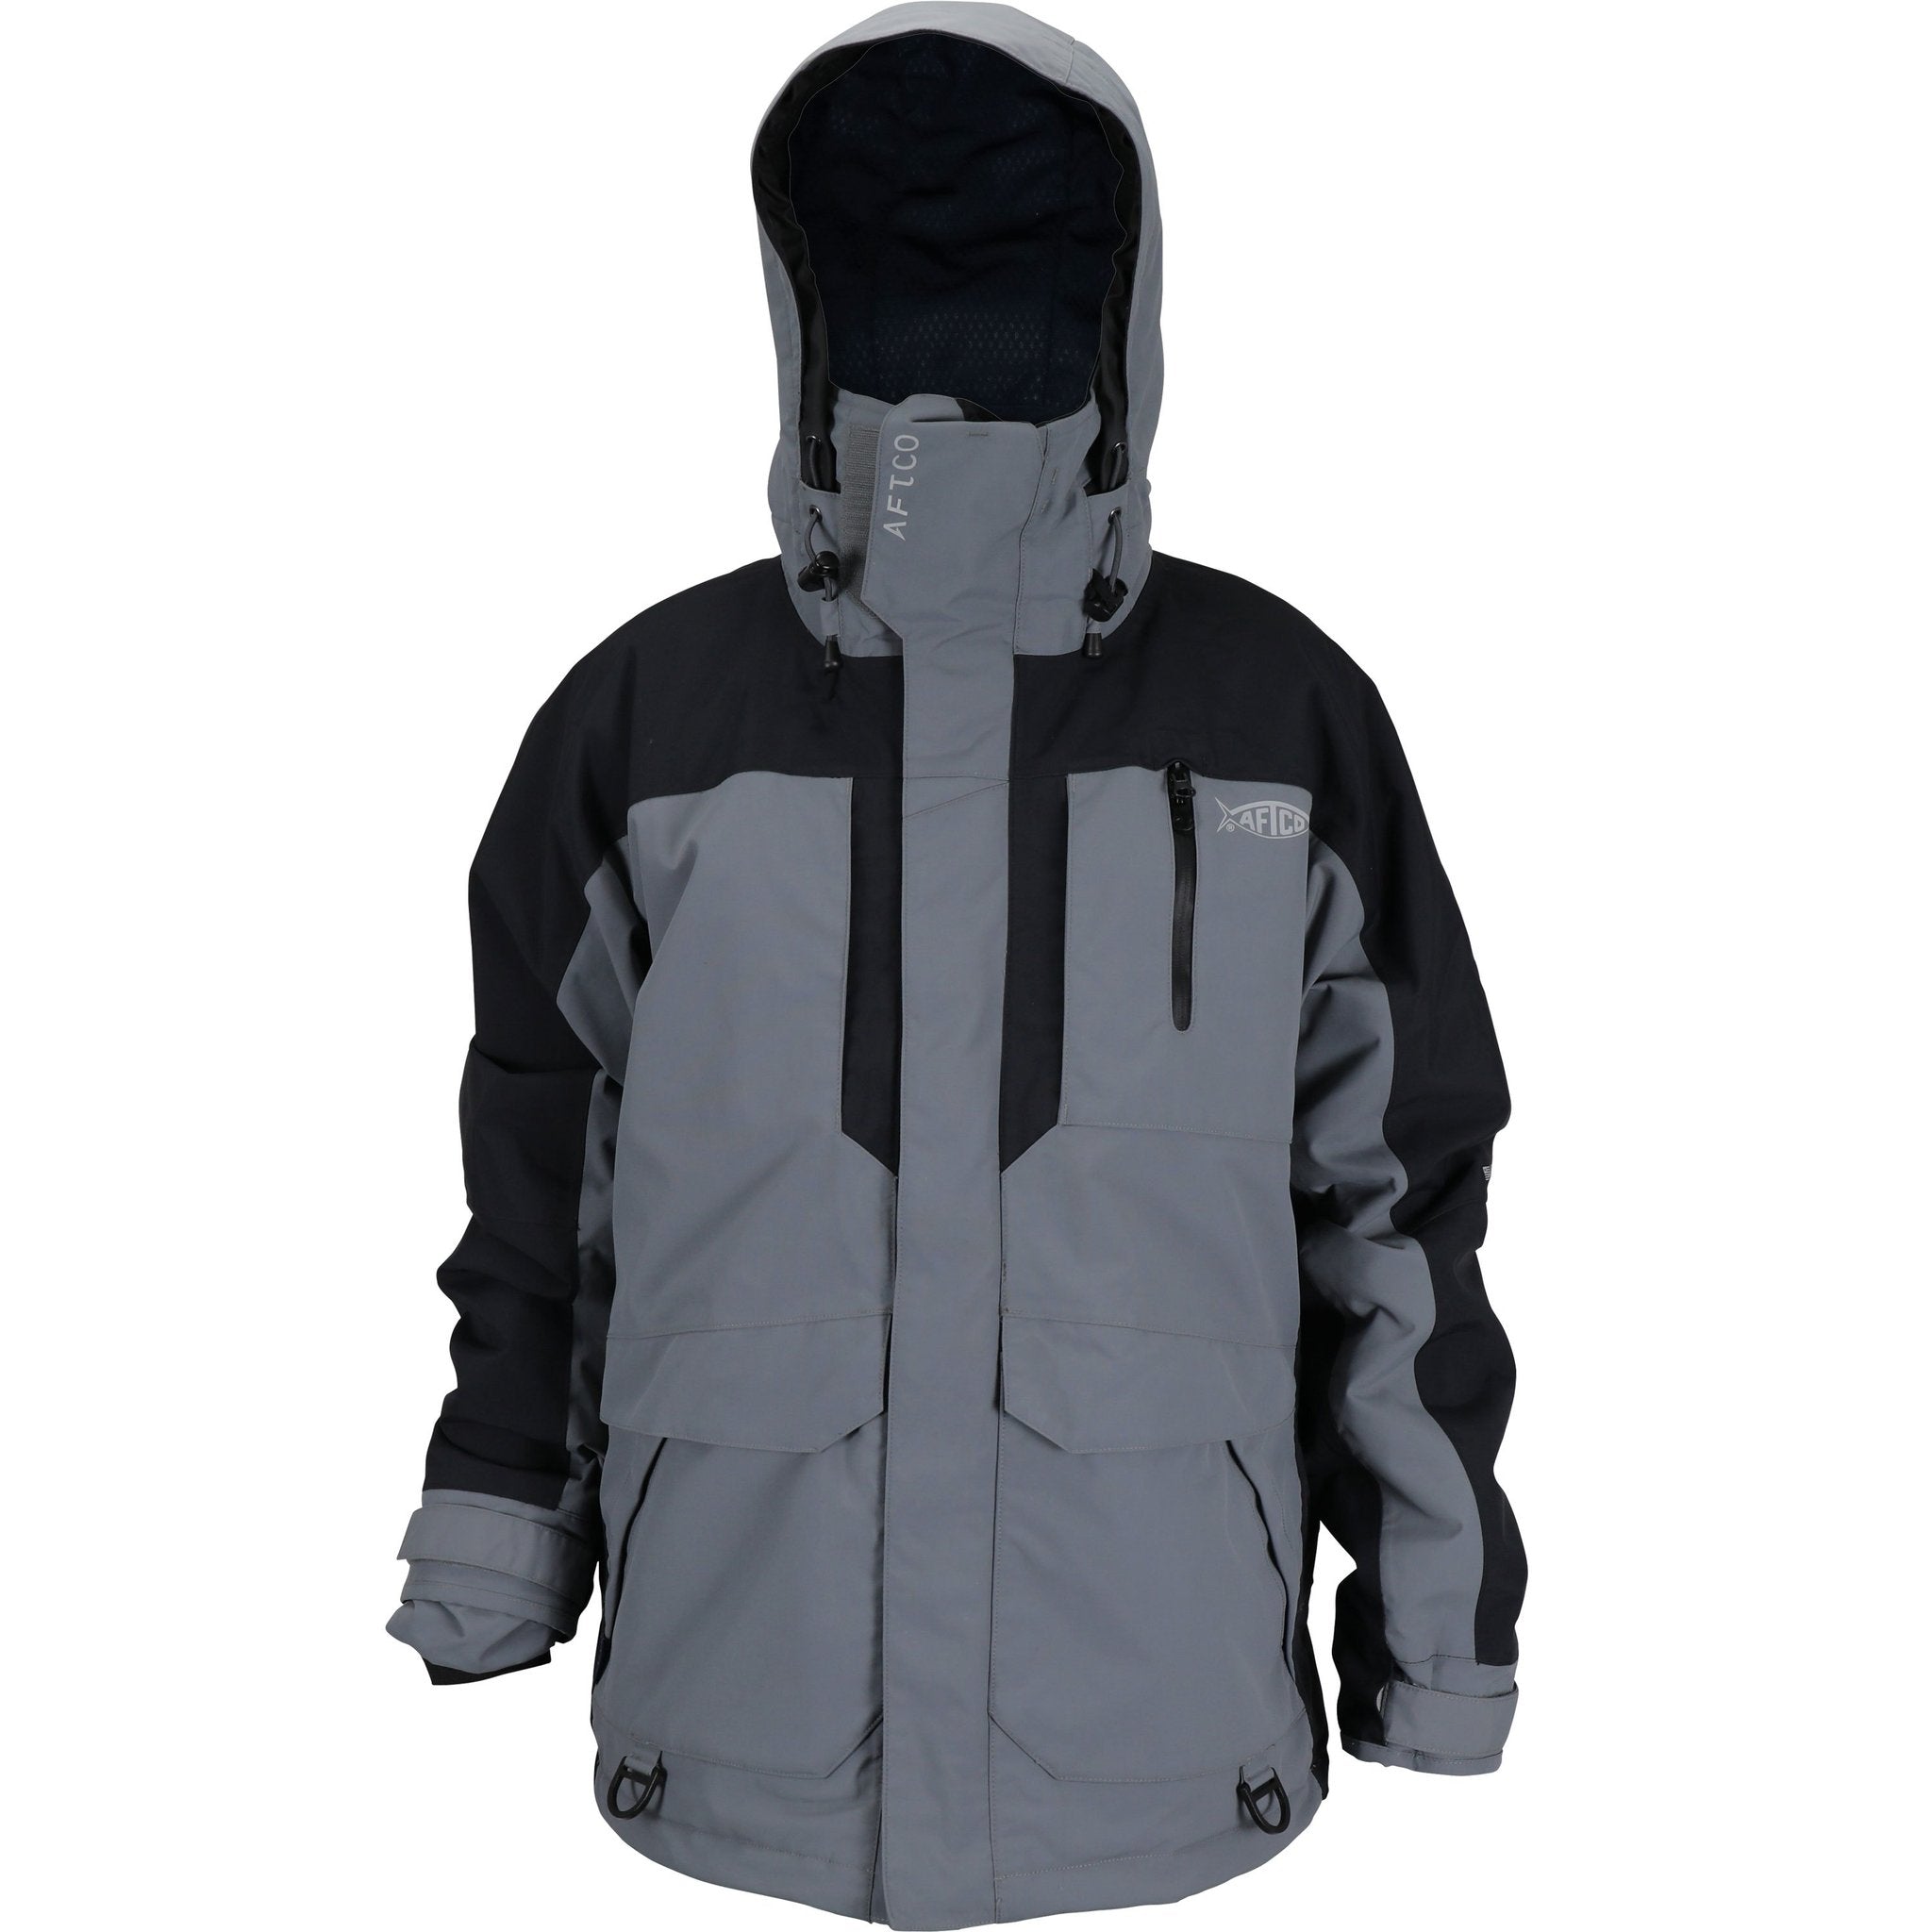 AFTCO Hydronaut Insulated Jacket - Charcoal - 2x